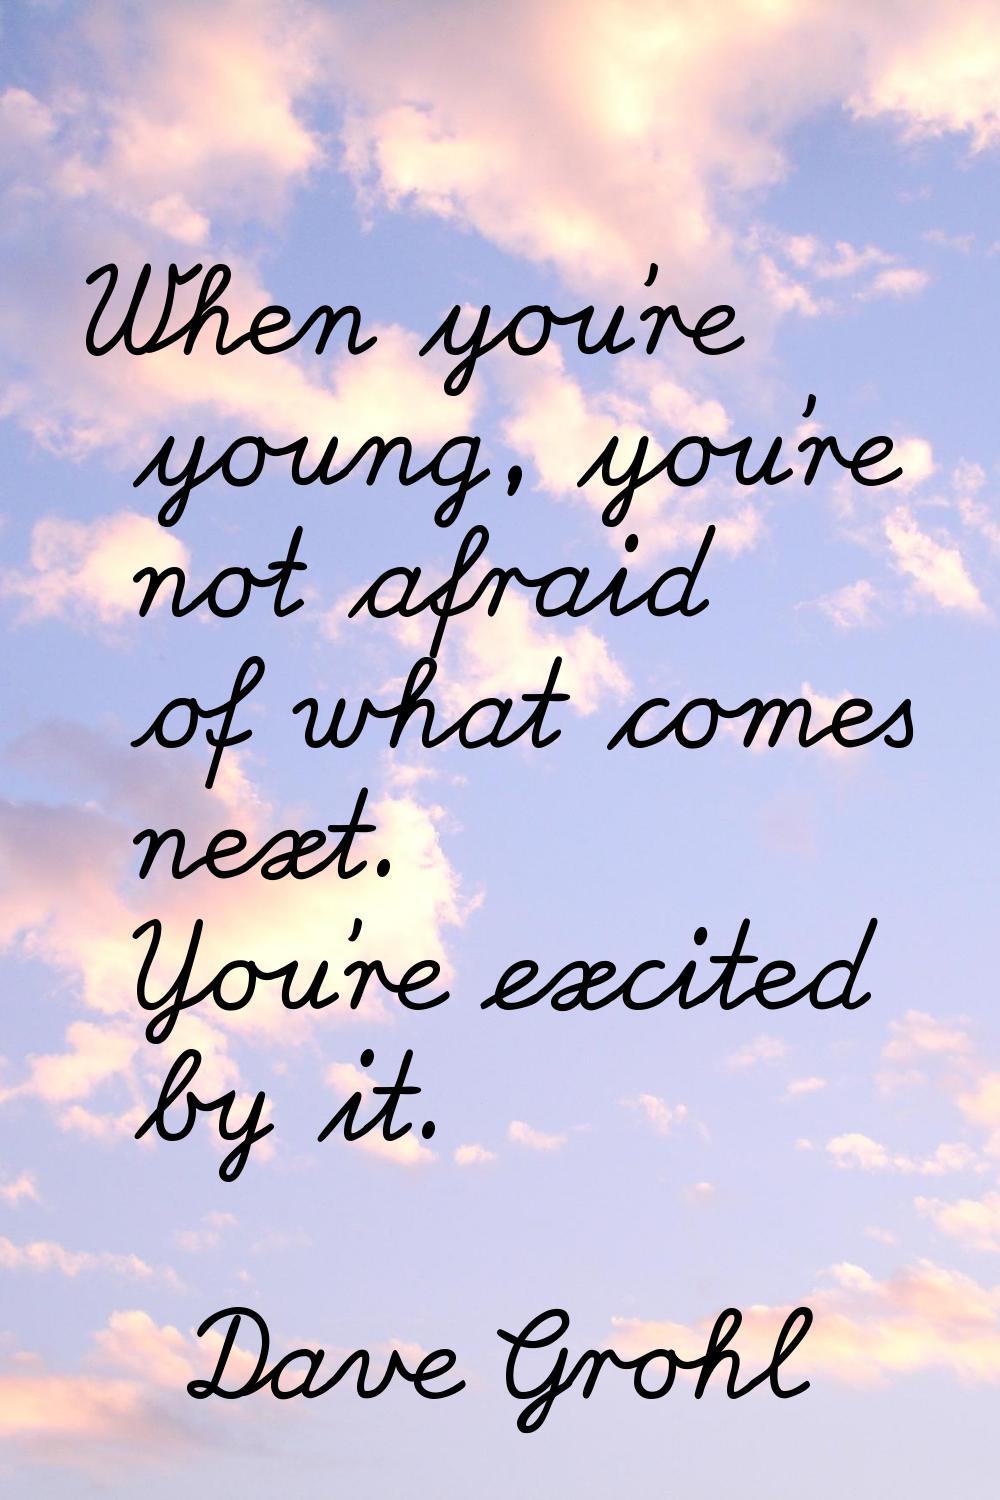 When you're young, you're not afraid of what comes next. You're excited by it.